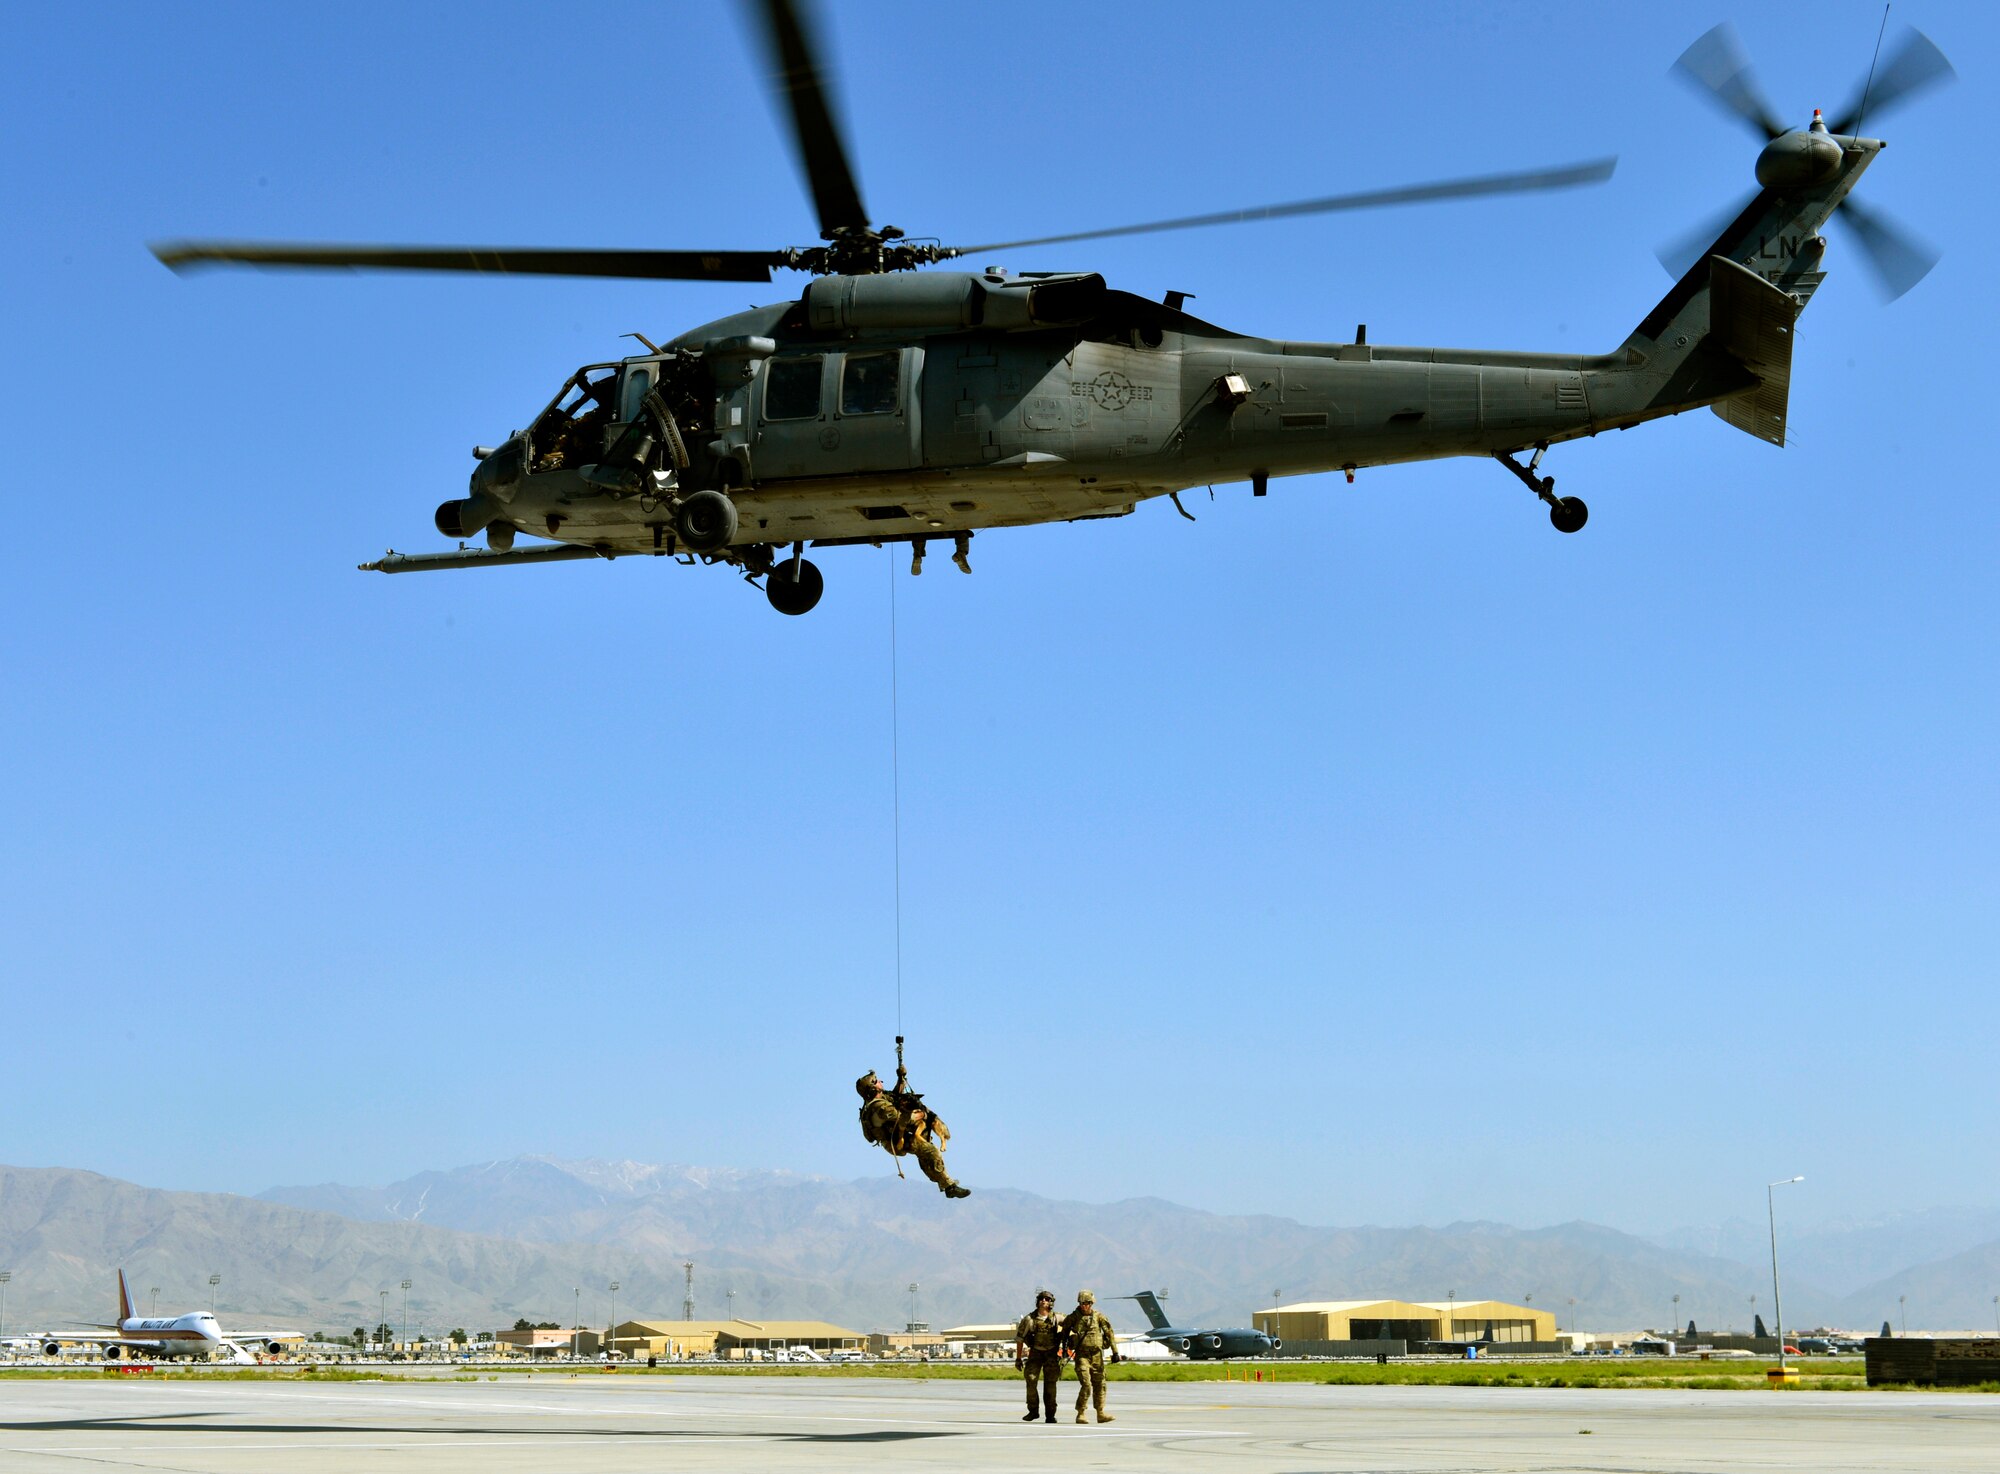 Airman 1st Class Jason Fischman, 83rd Expeditionary Rescue Squadron pararescueman, hoists an U.S. Army tactical explosive detection dogs into a HH-60G Pave Hawk helicopter during a joint rescue training scenario at Bagram Airfield, Afghanistan, June 21, 2013.  This training was a first for both branches and prepared them for future rescue missions.  Fischman is deployed from Royal Air Force Lakenheath, England. (U.S. Air Force photo/ Staff Sgt. Stephenie Wade)